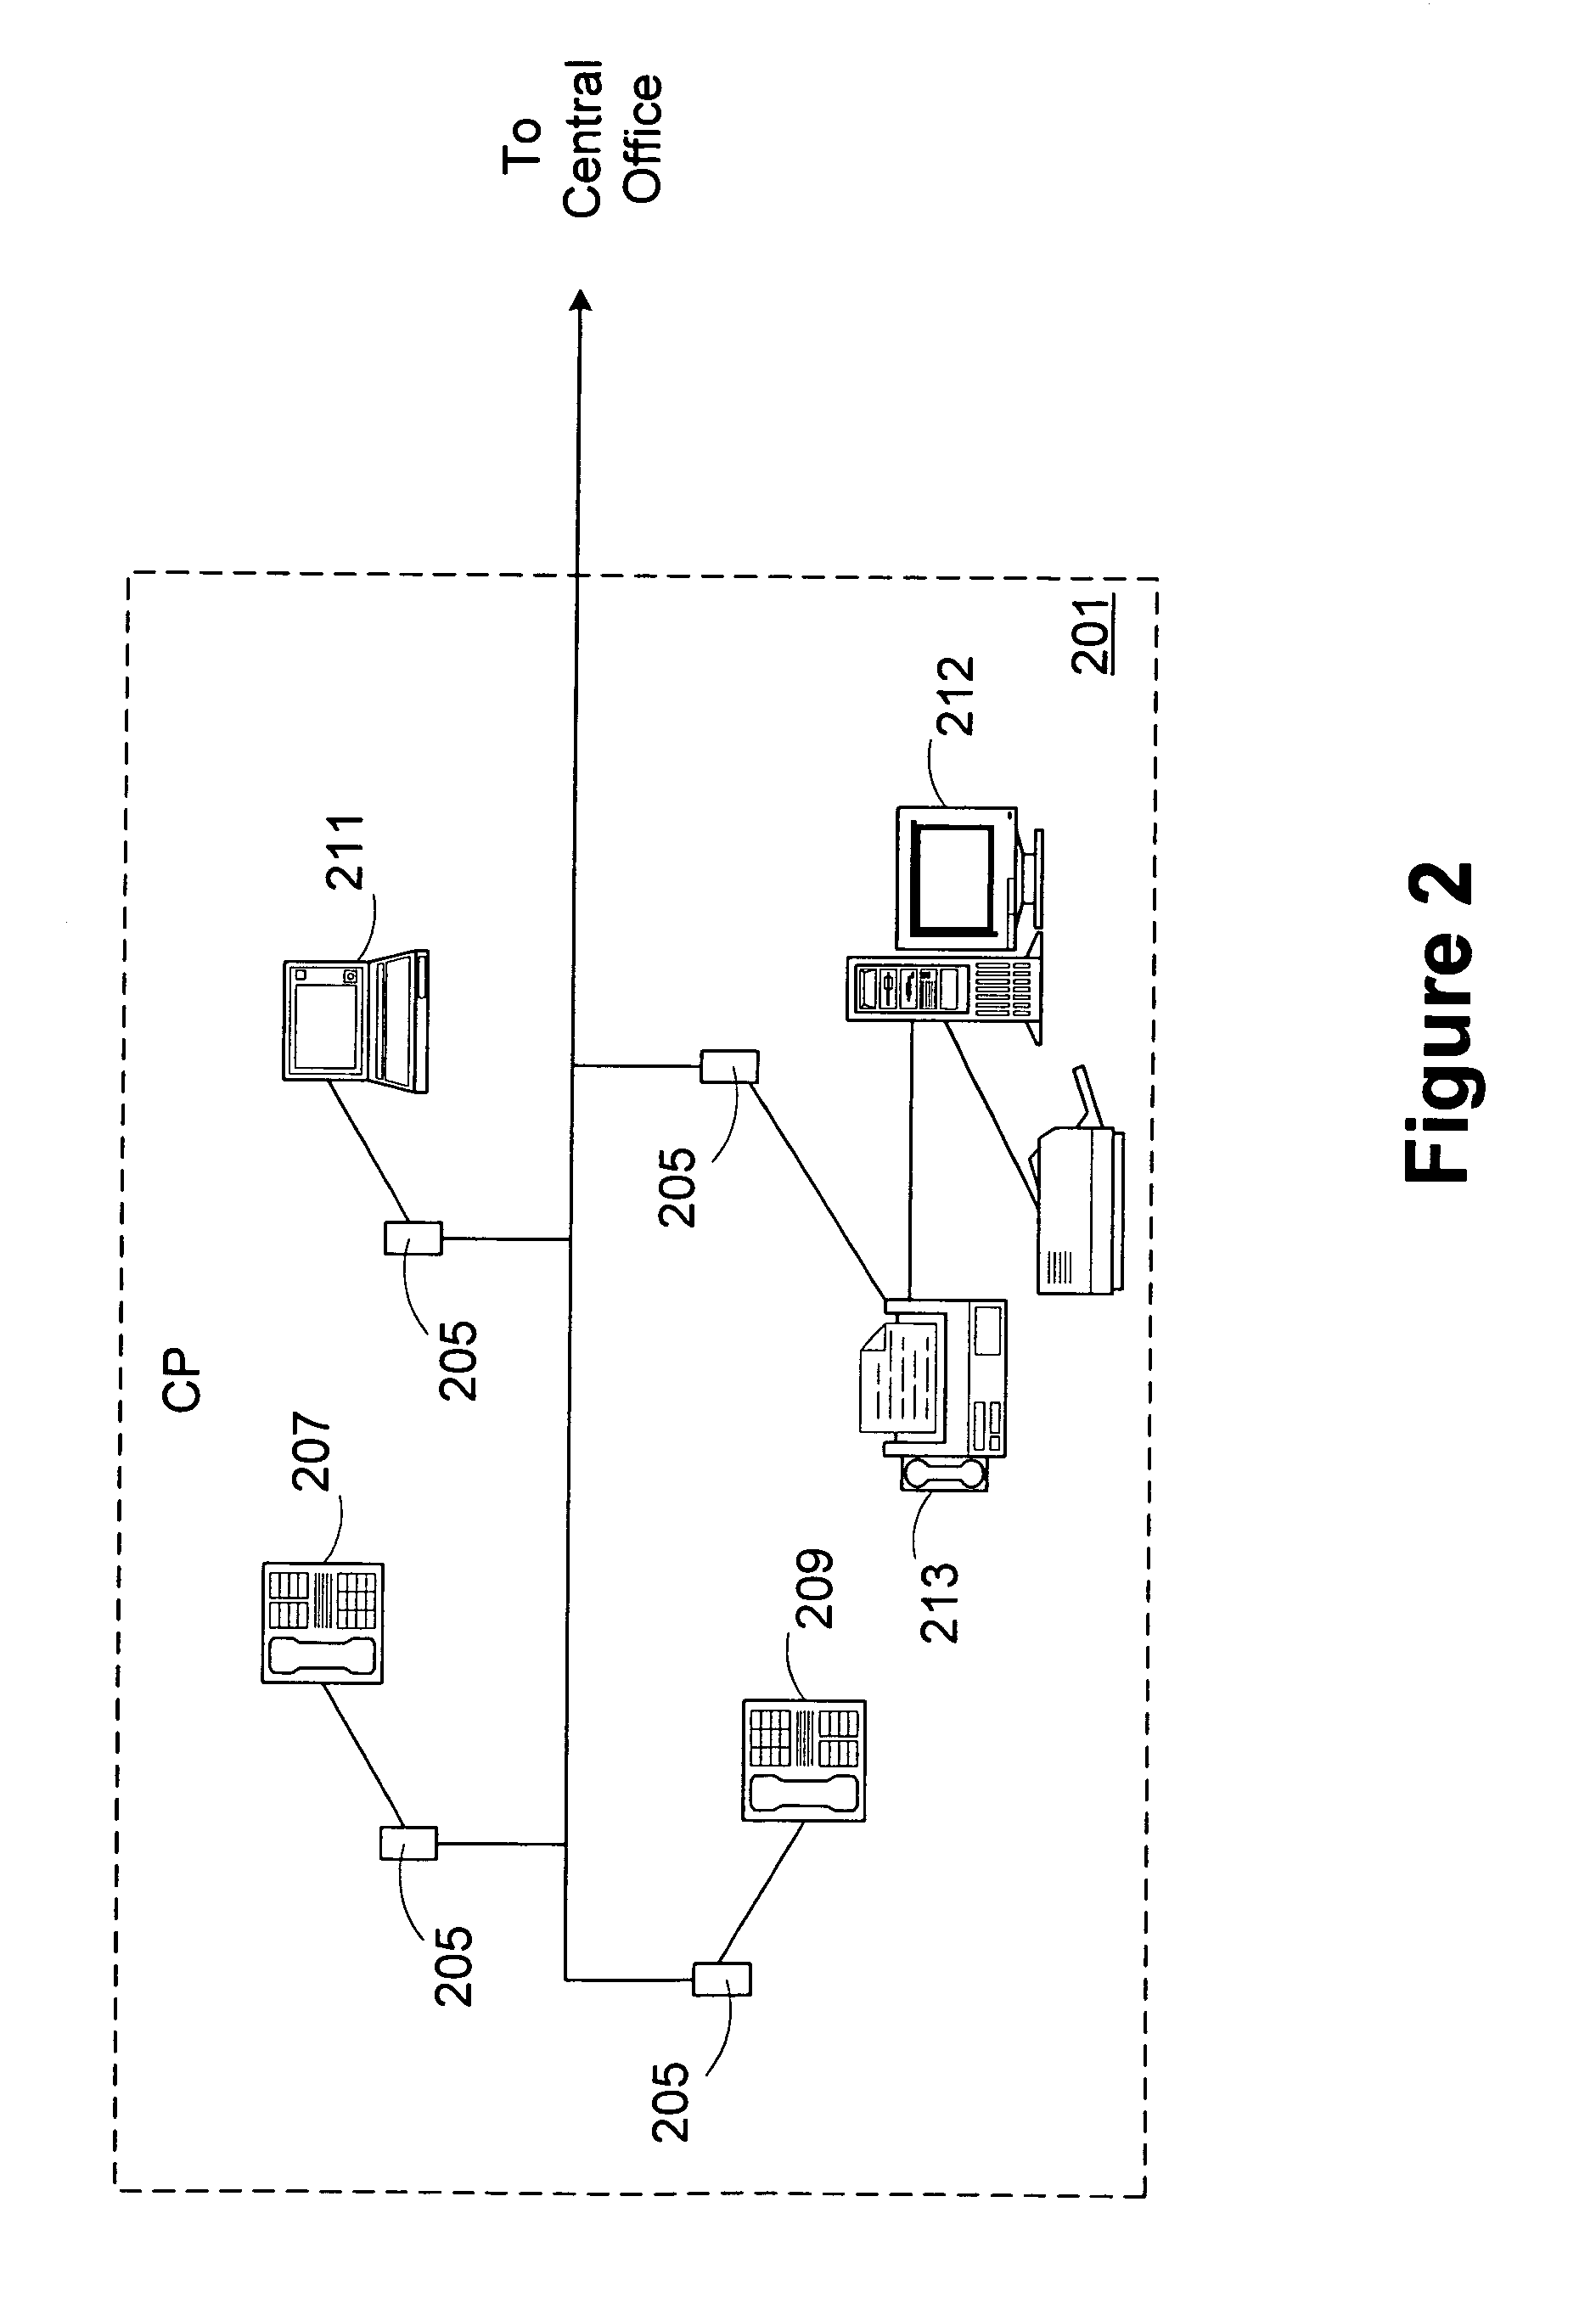 Device and method for determining characteristics of a digital subscriber line